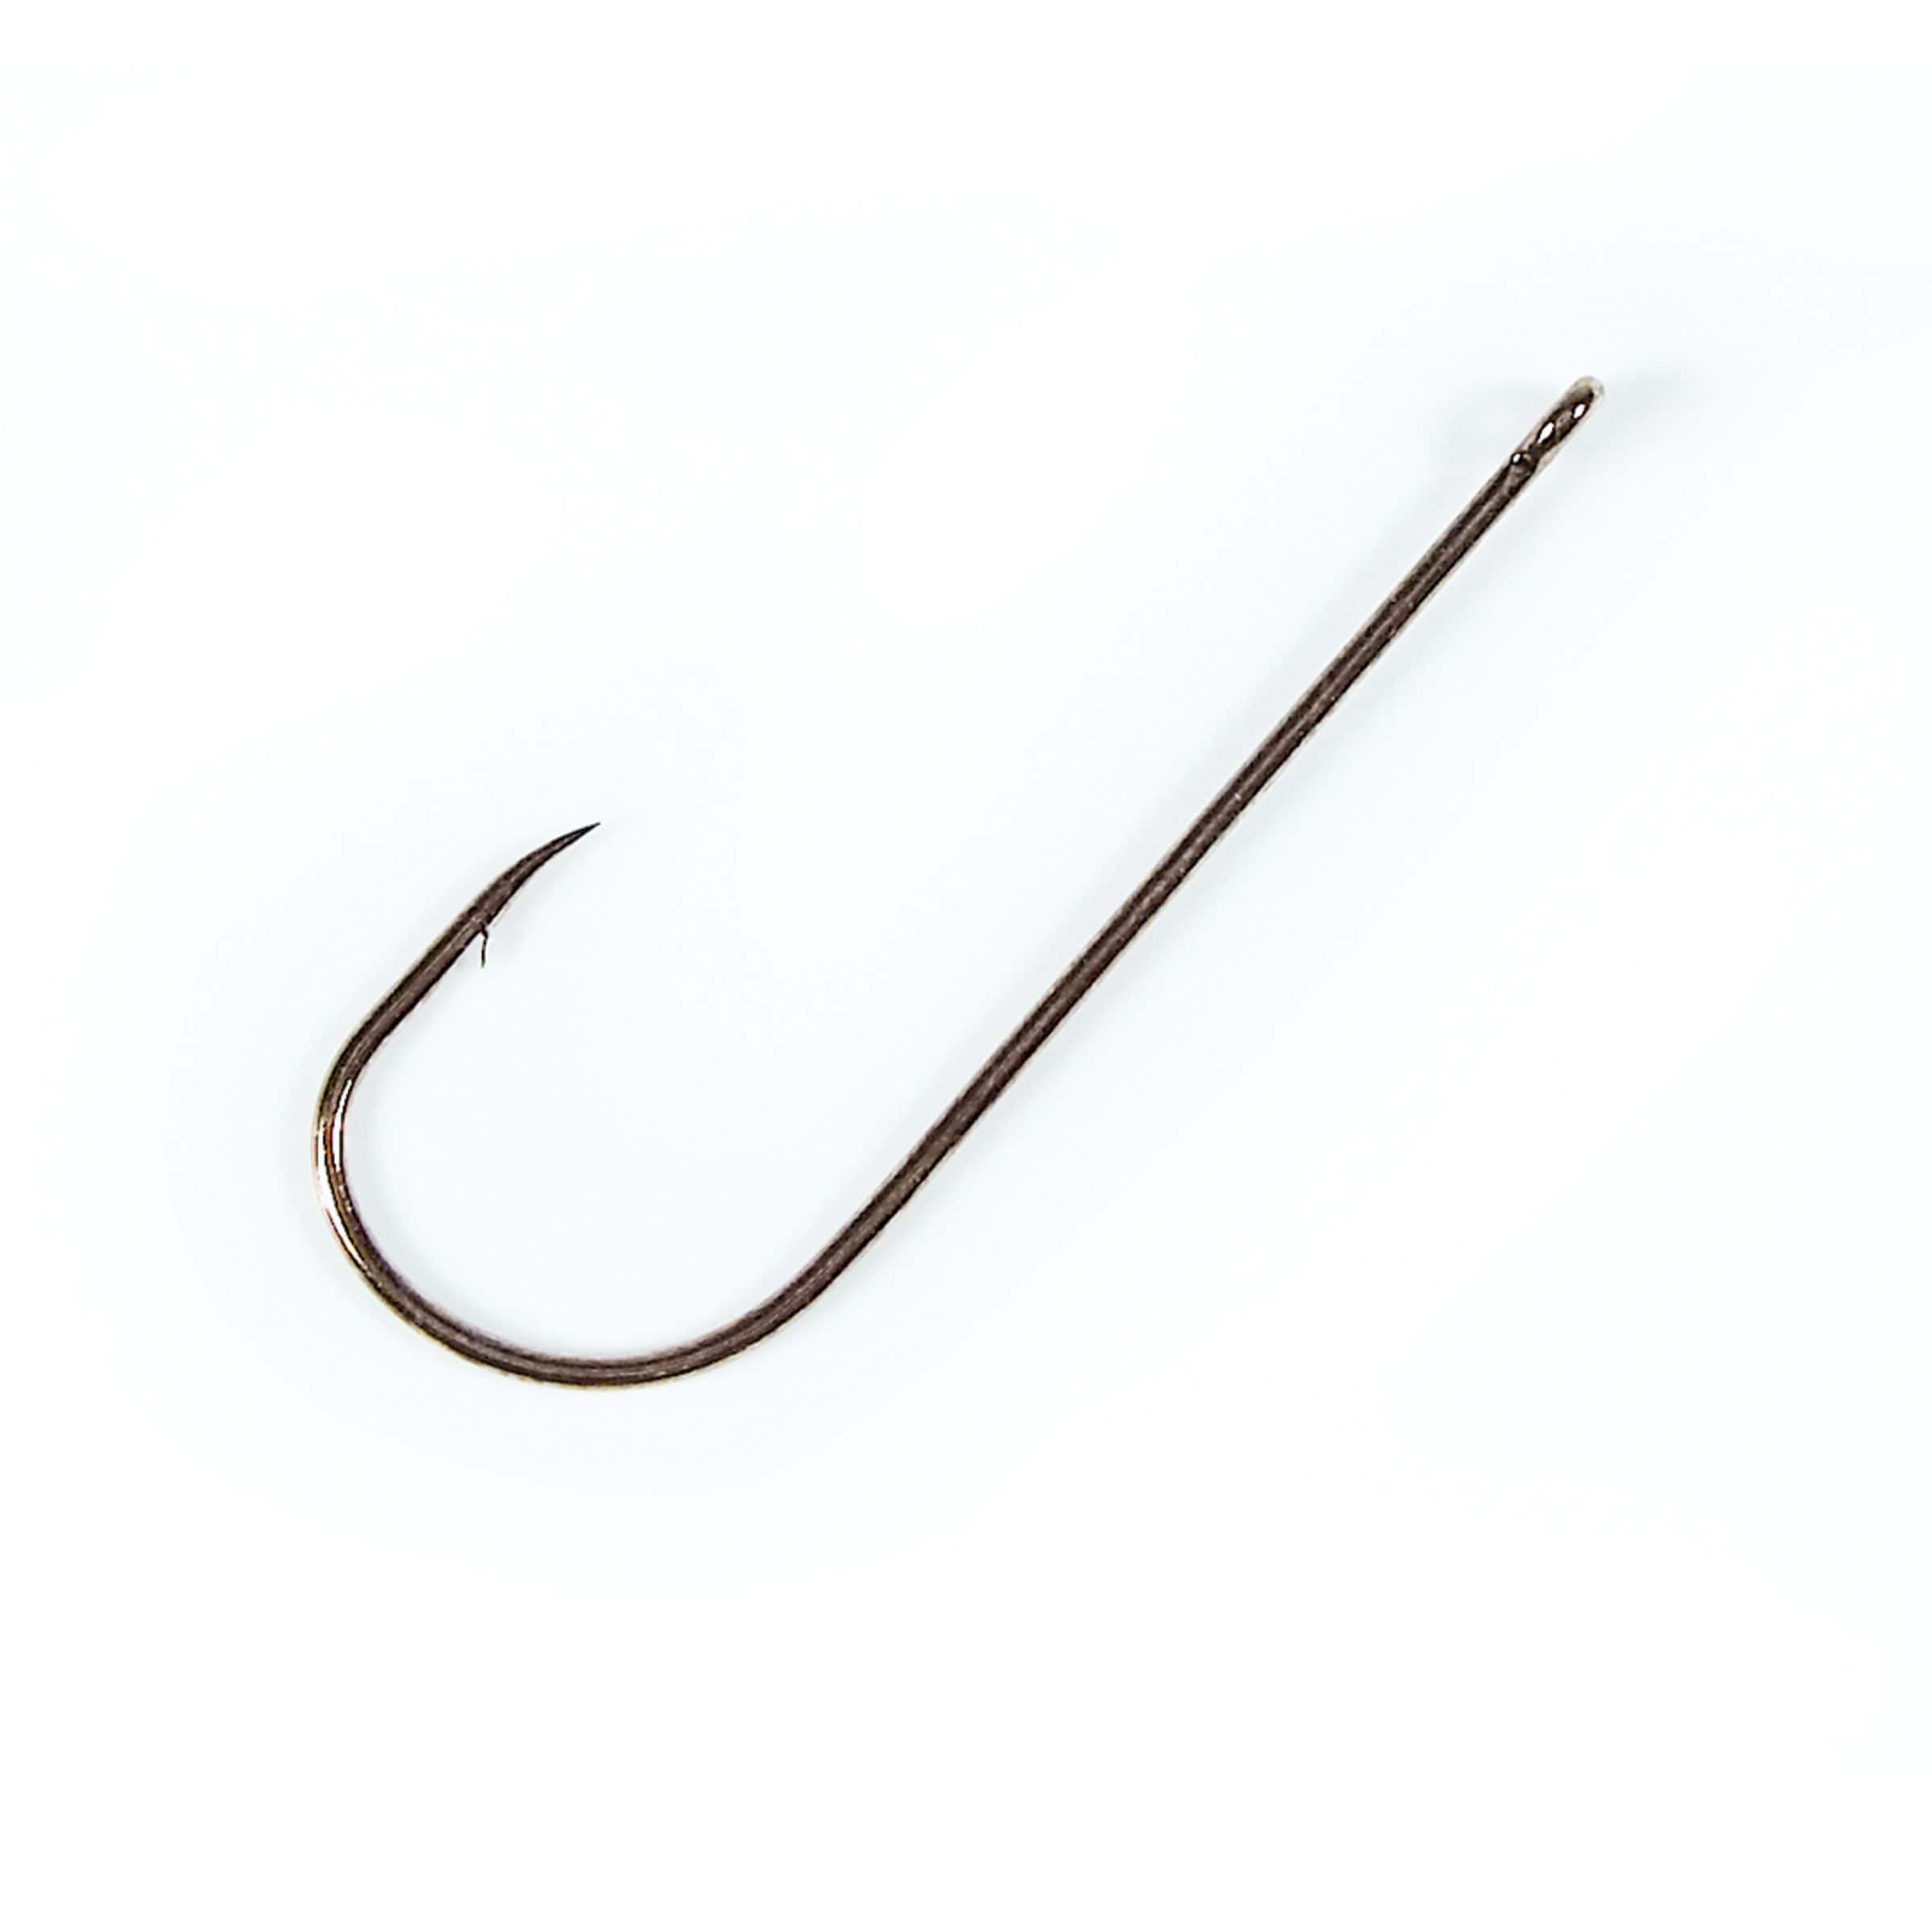 https://media-www.canadiantire.ca/product/playing/fishing/fishing-lures/1781224/gamakatsu-aberdeen-hook-bronze-10-pack-size-10-3a74011e-f605-4f9a-825d-071e18ef0d6a-jpgrendition.jpg